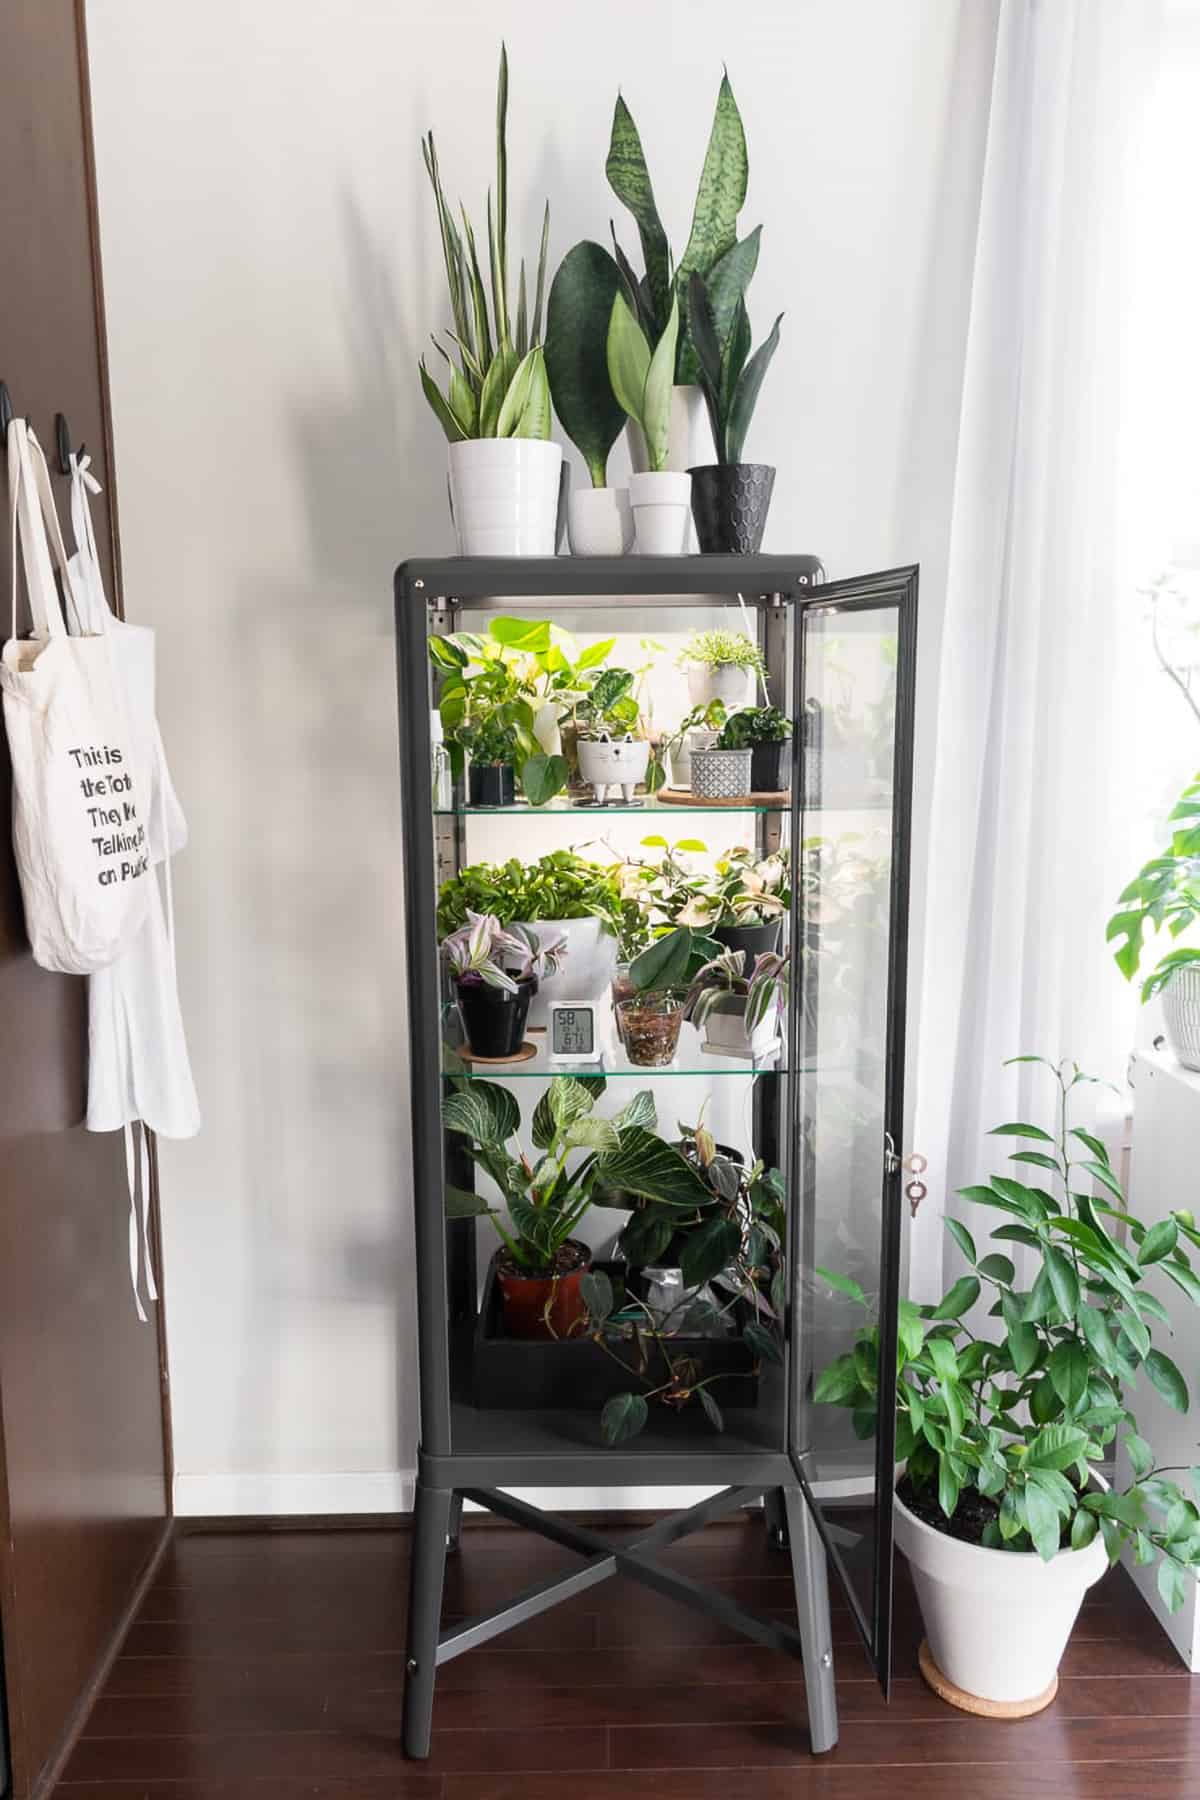 Black Ikea cabinet greenhouse with tropical potted plants and glass enclosure for humidity.